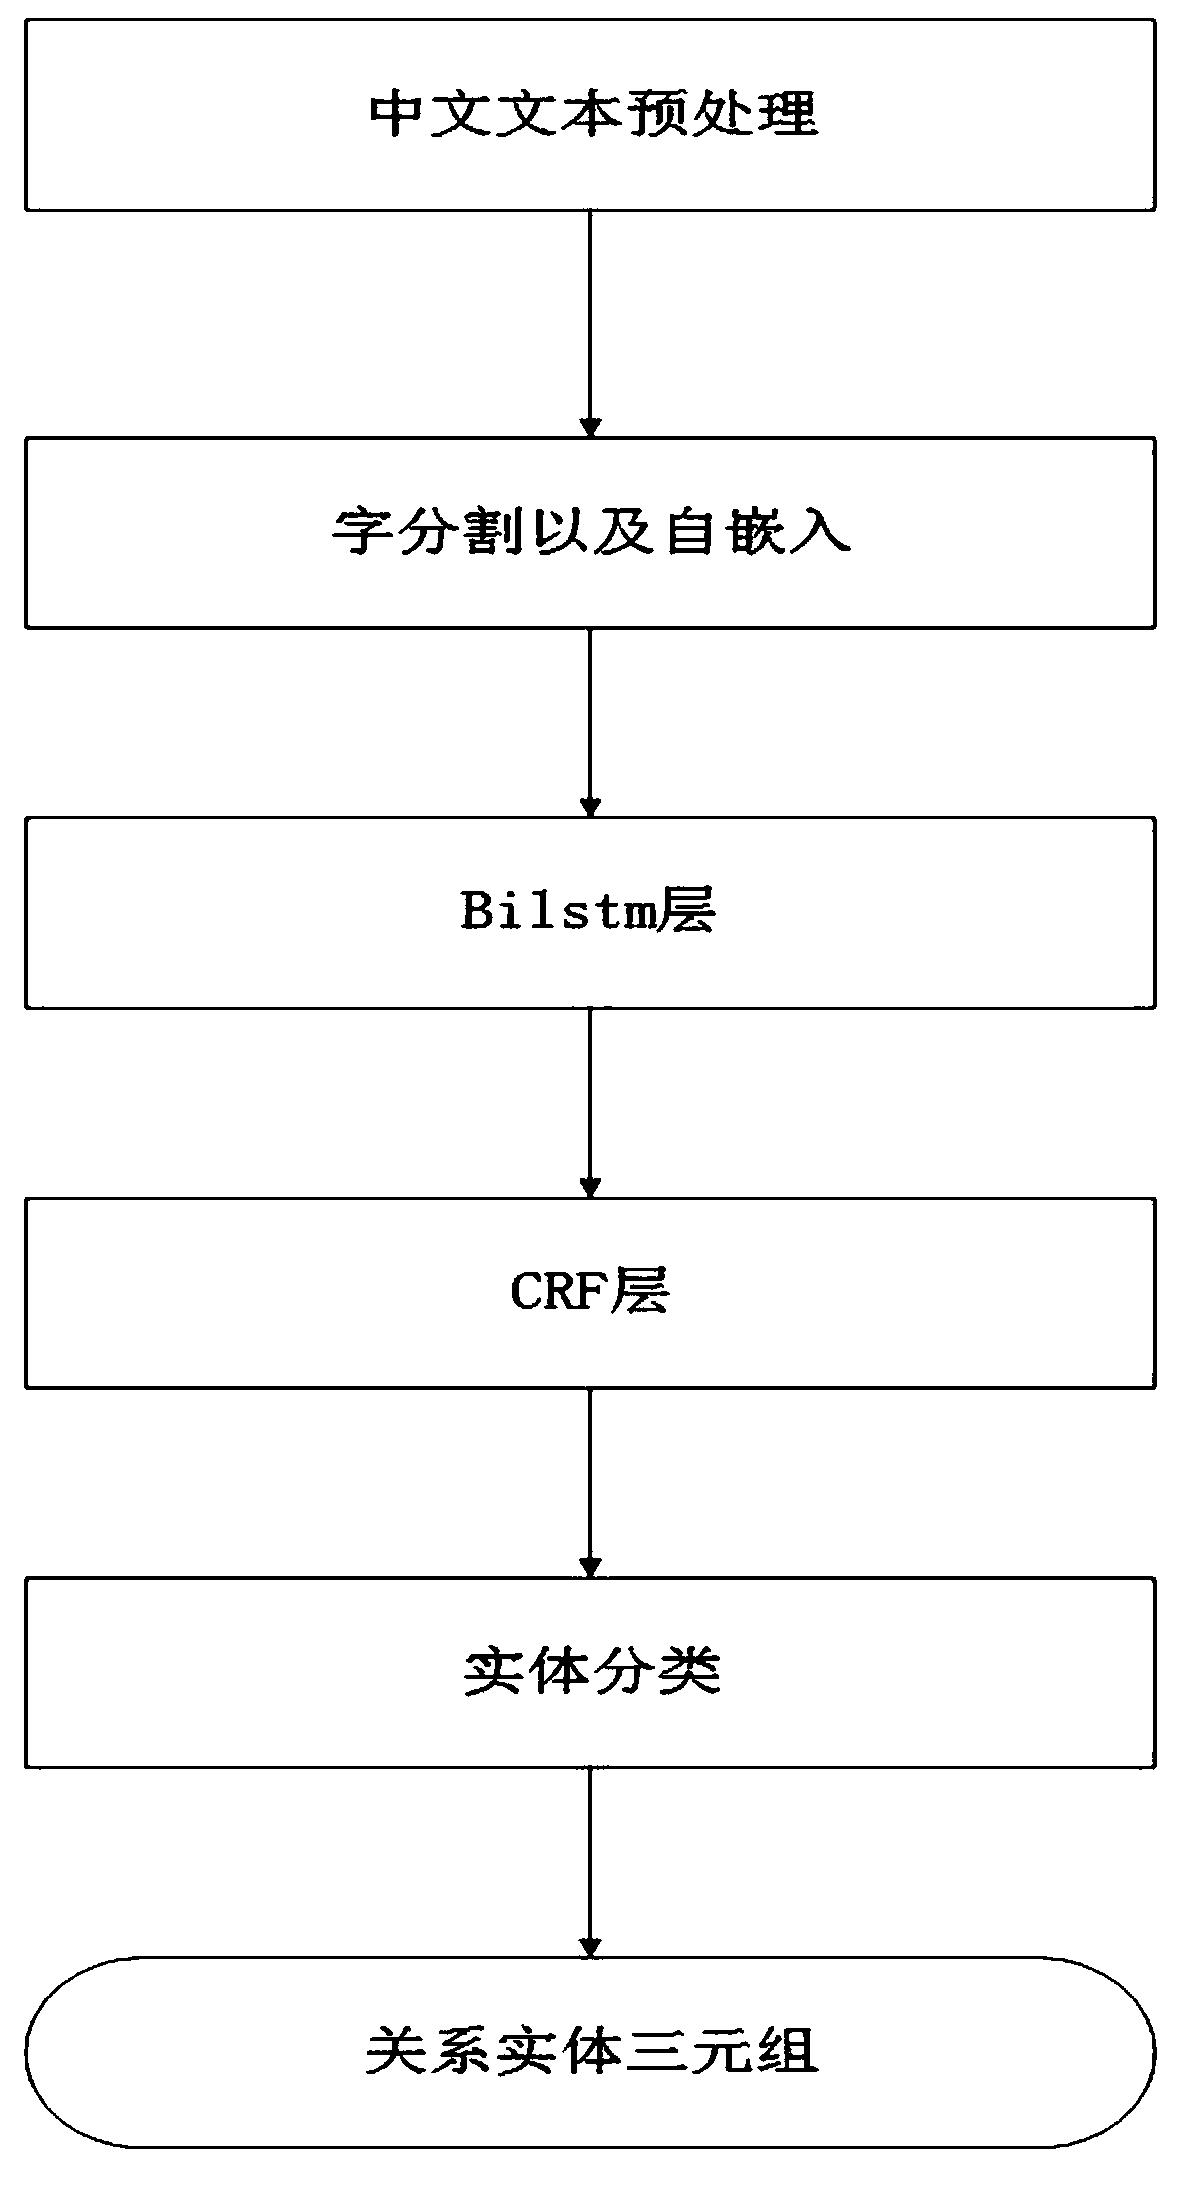 Method of entity relation extraction based on neural network